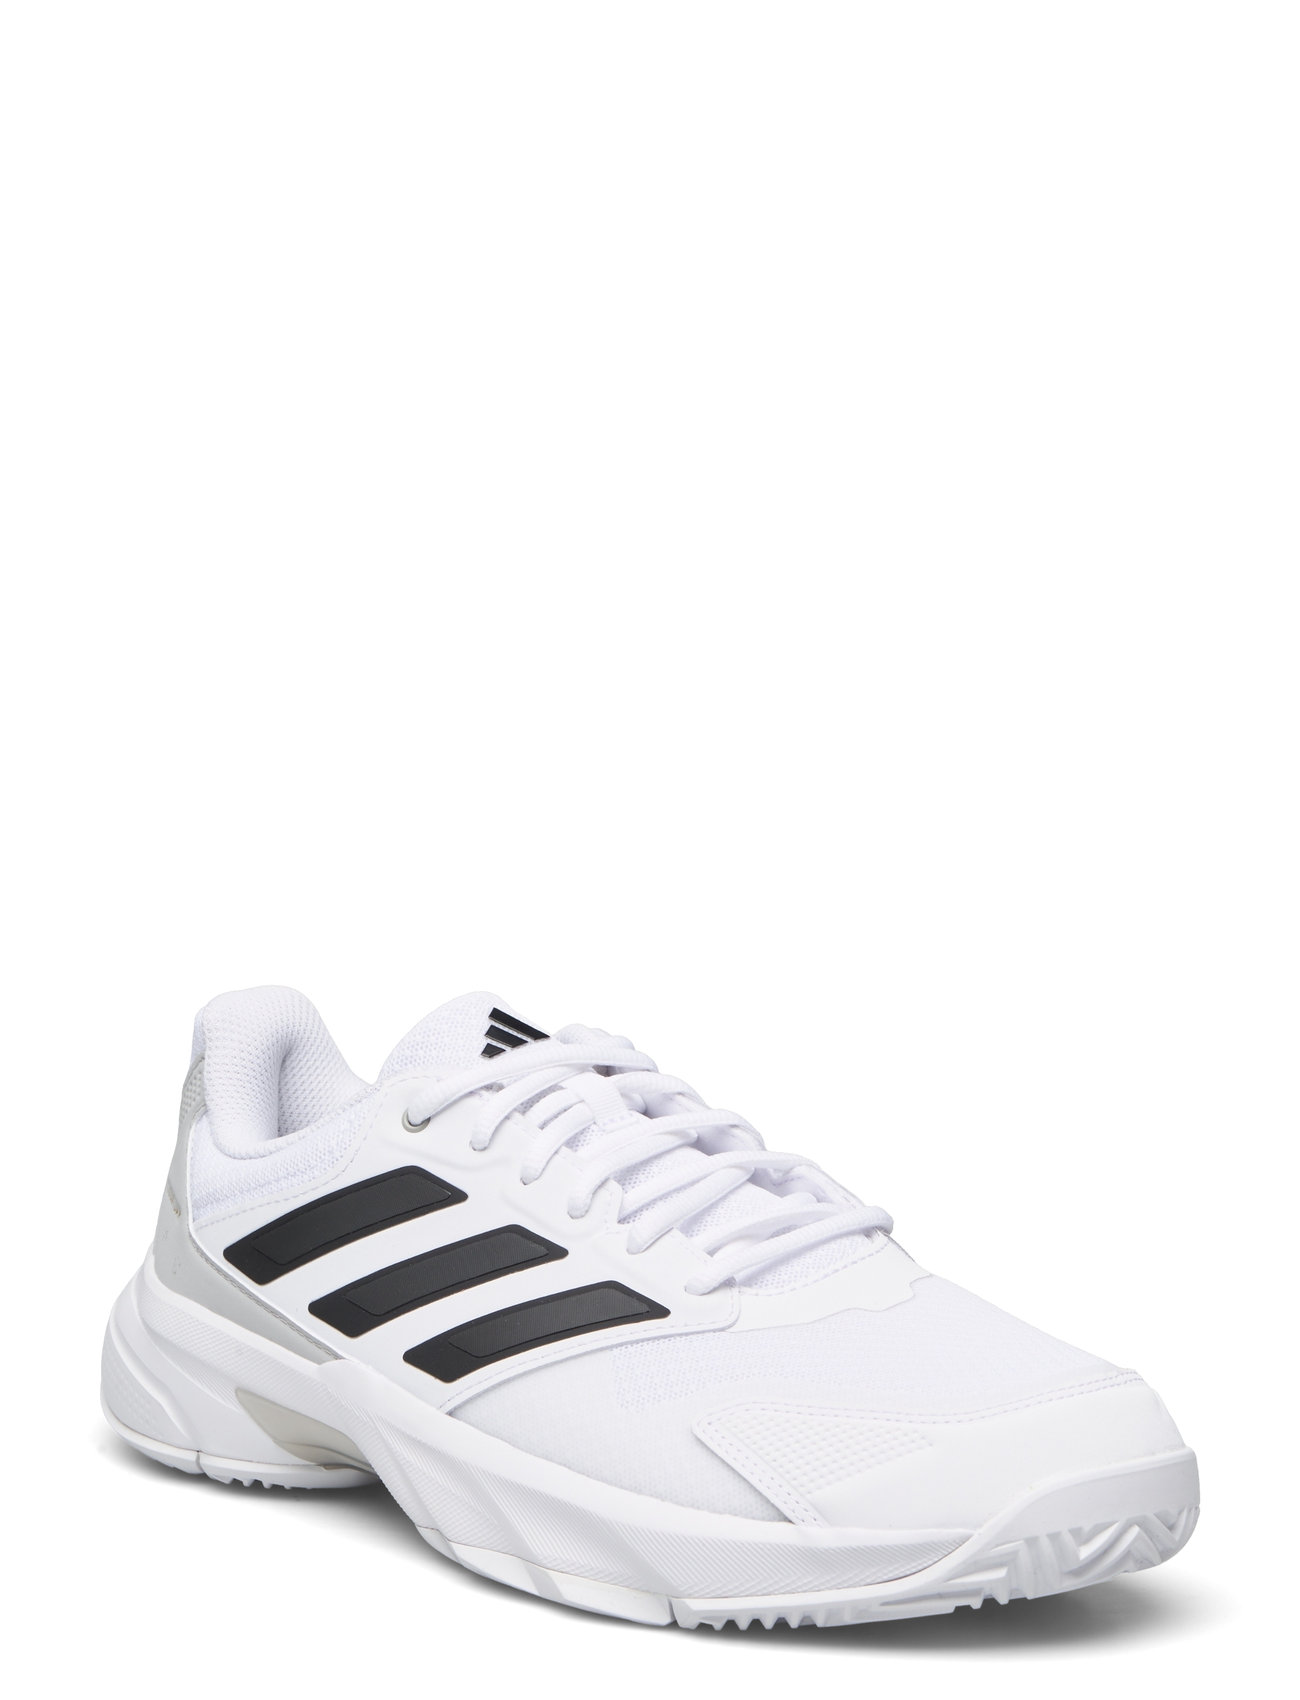 Courtjam Control 3 M Sport Sport Shoes Racketsports Shoes Tennis Shoes White Adidas Performance